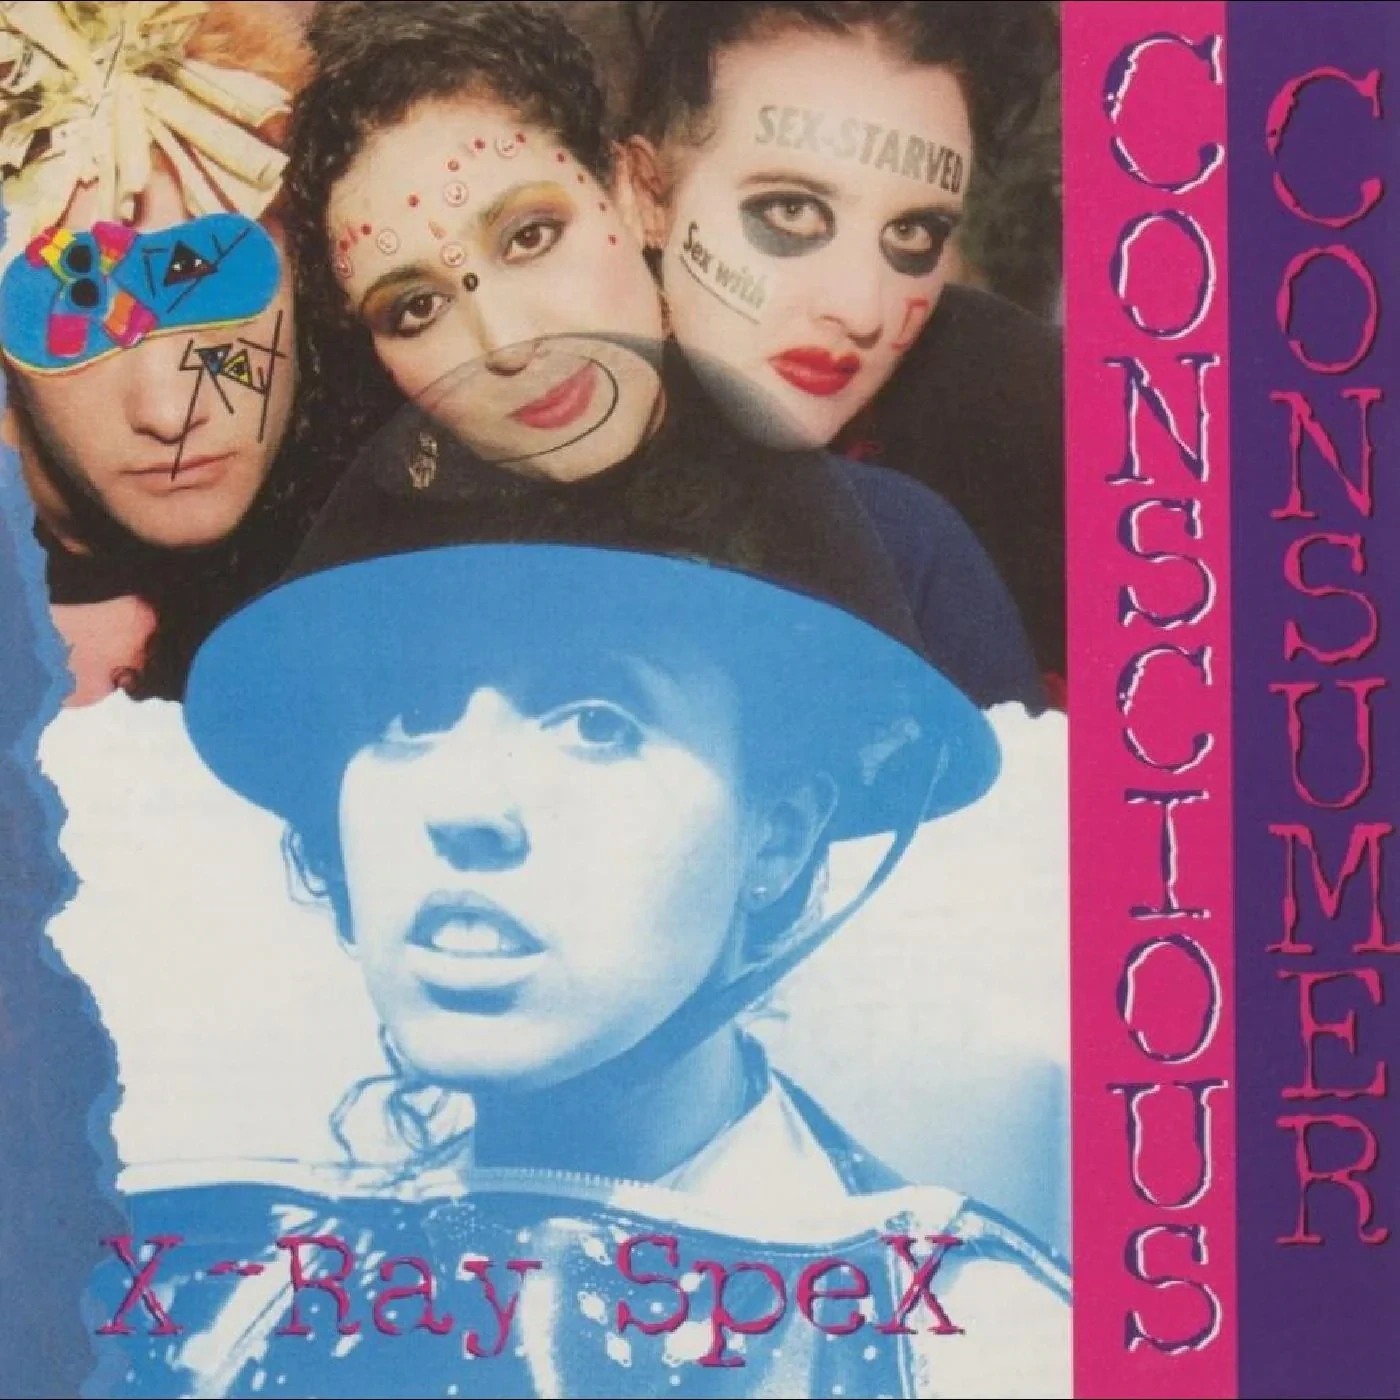 X-Ray Spex "Conscious Consumer: Indie Exclusive" *cLeAr ViNyL!*